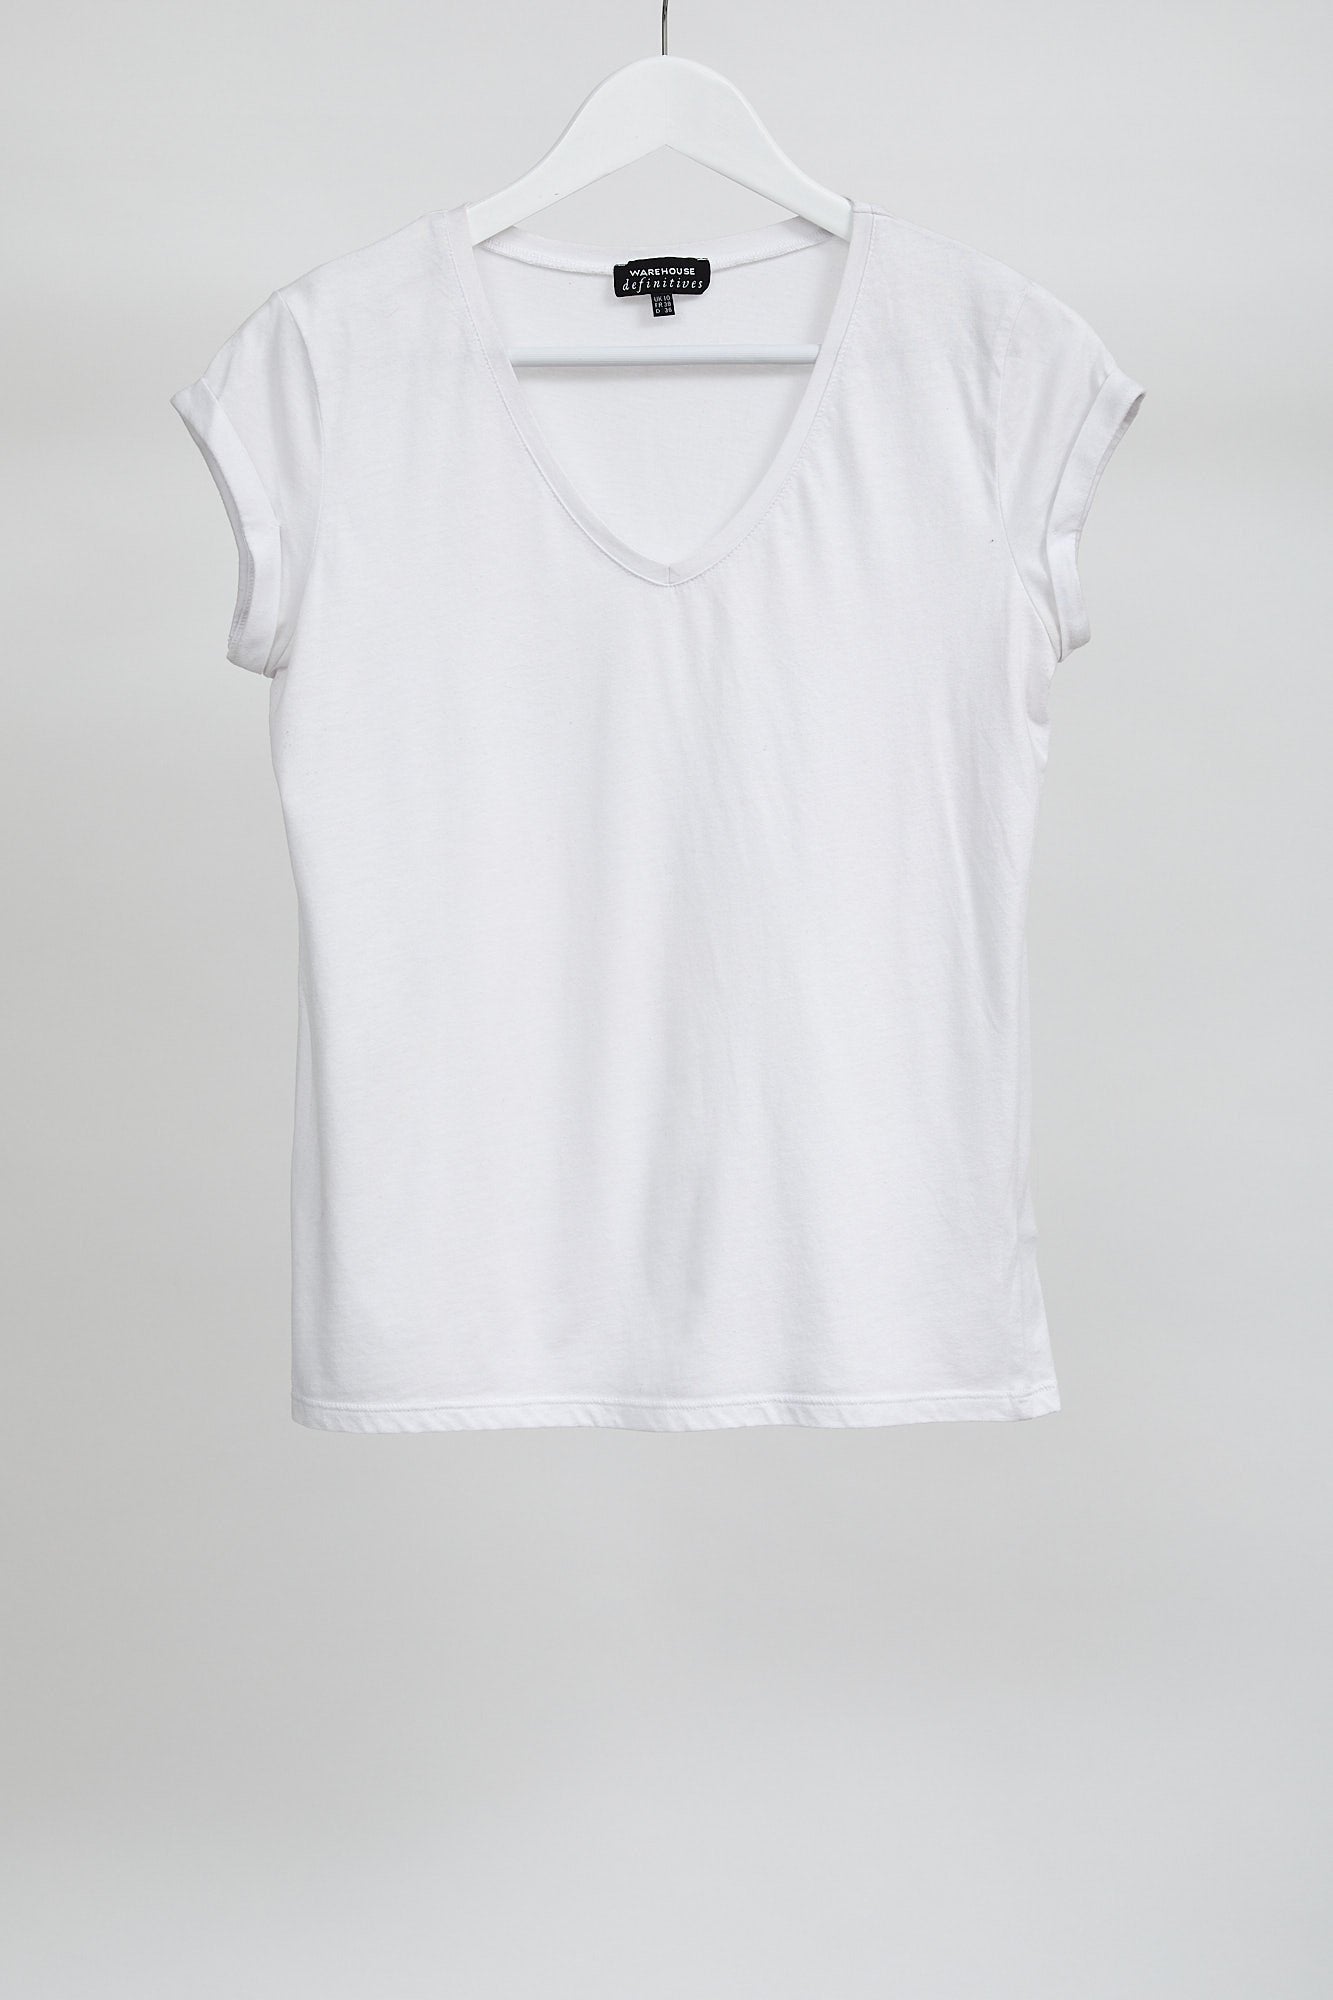 Womens White Short Sleeve Top: Size Small